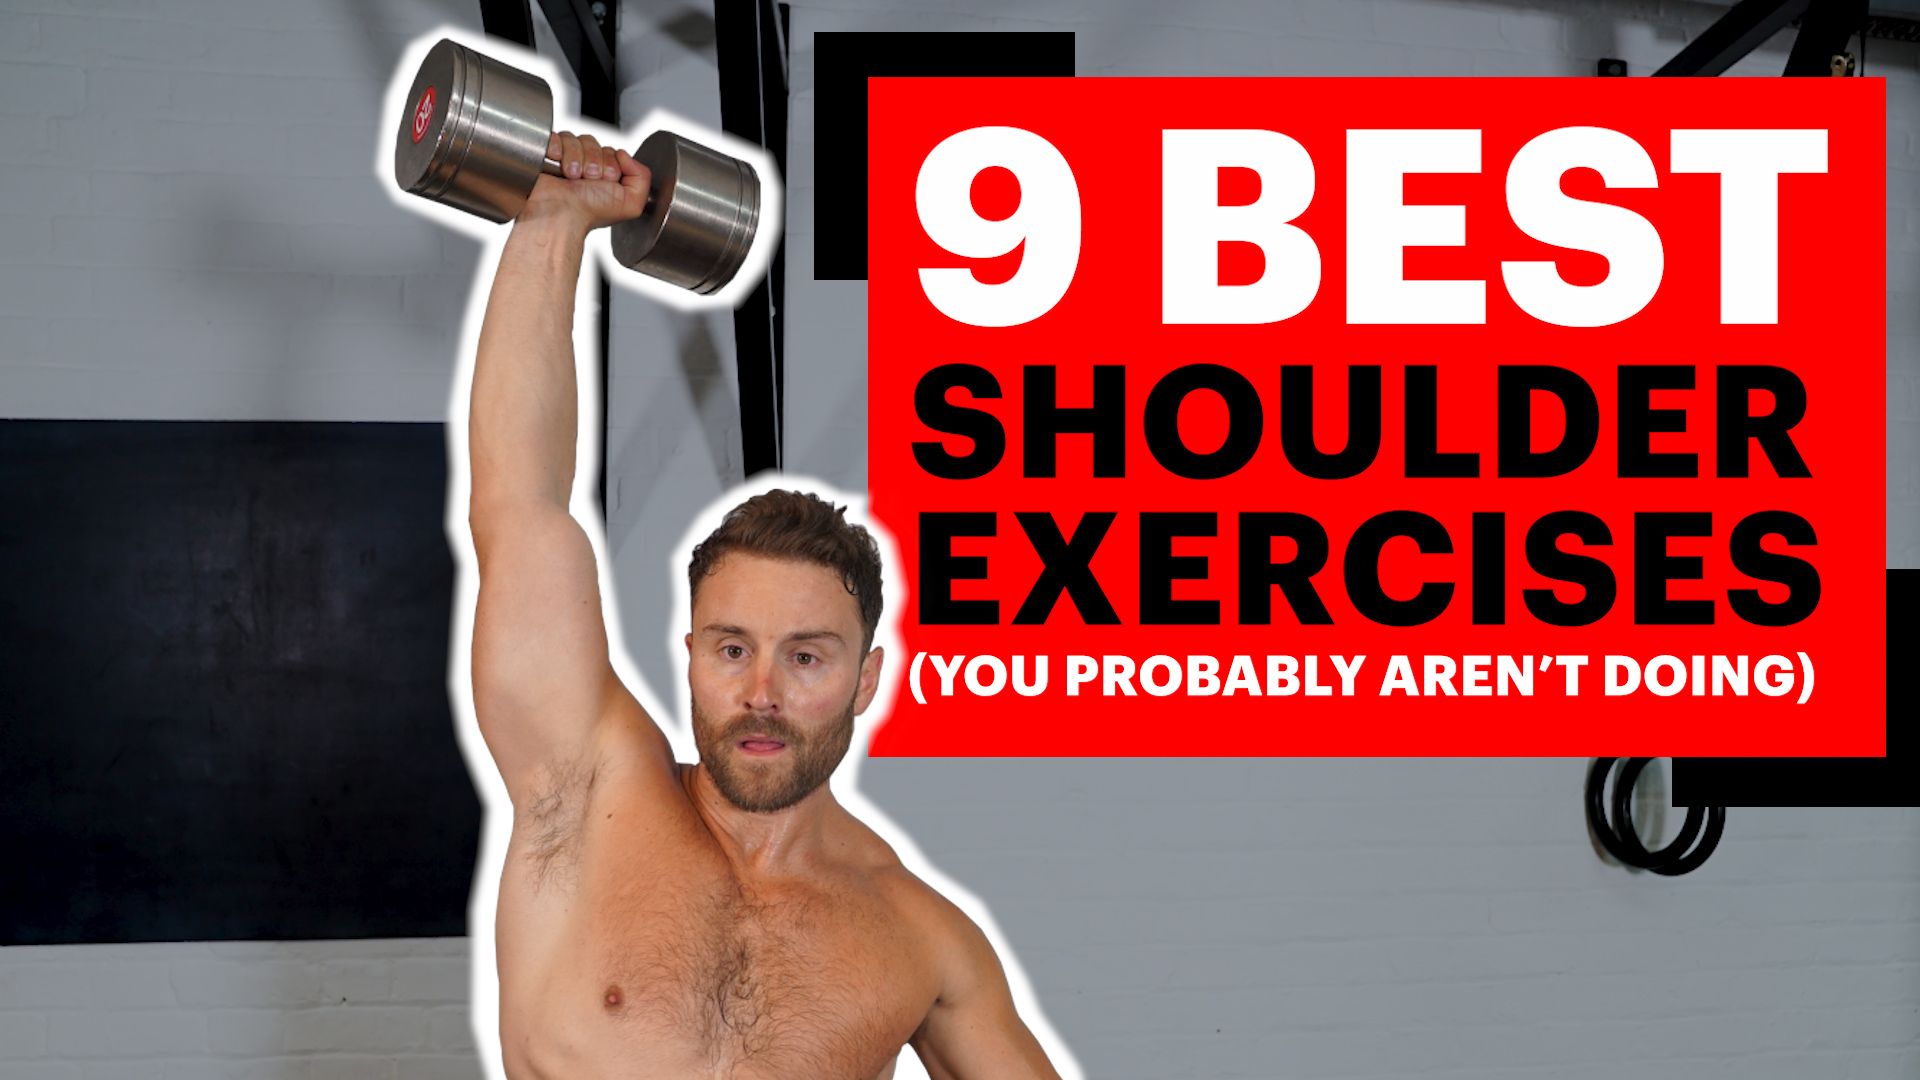 7 Best Shoulder Exercises Without Equipment You Can Do Anywhere  Shoulder workout  without weights, Shoulder workout, Best shoulder workout